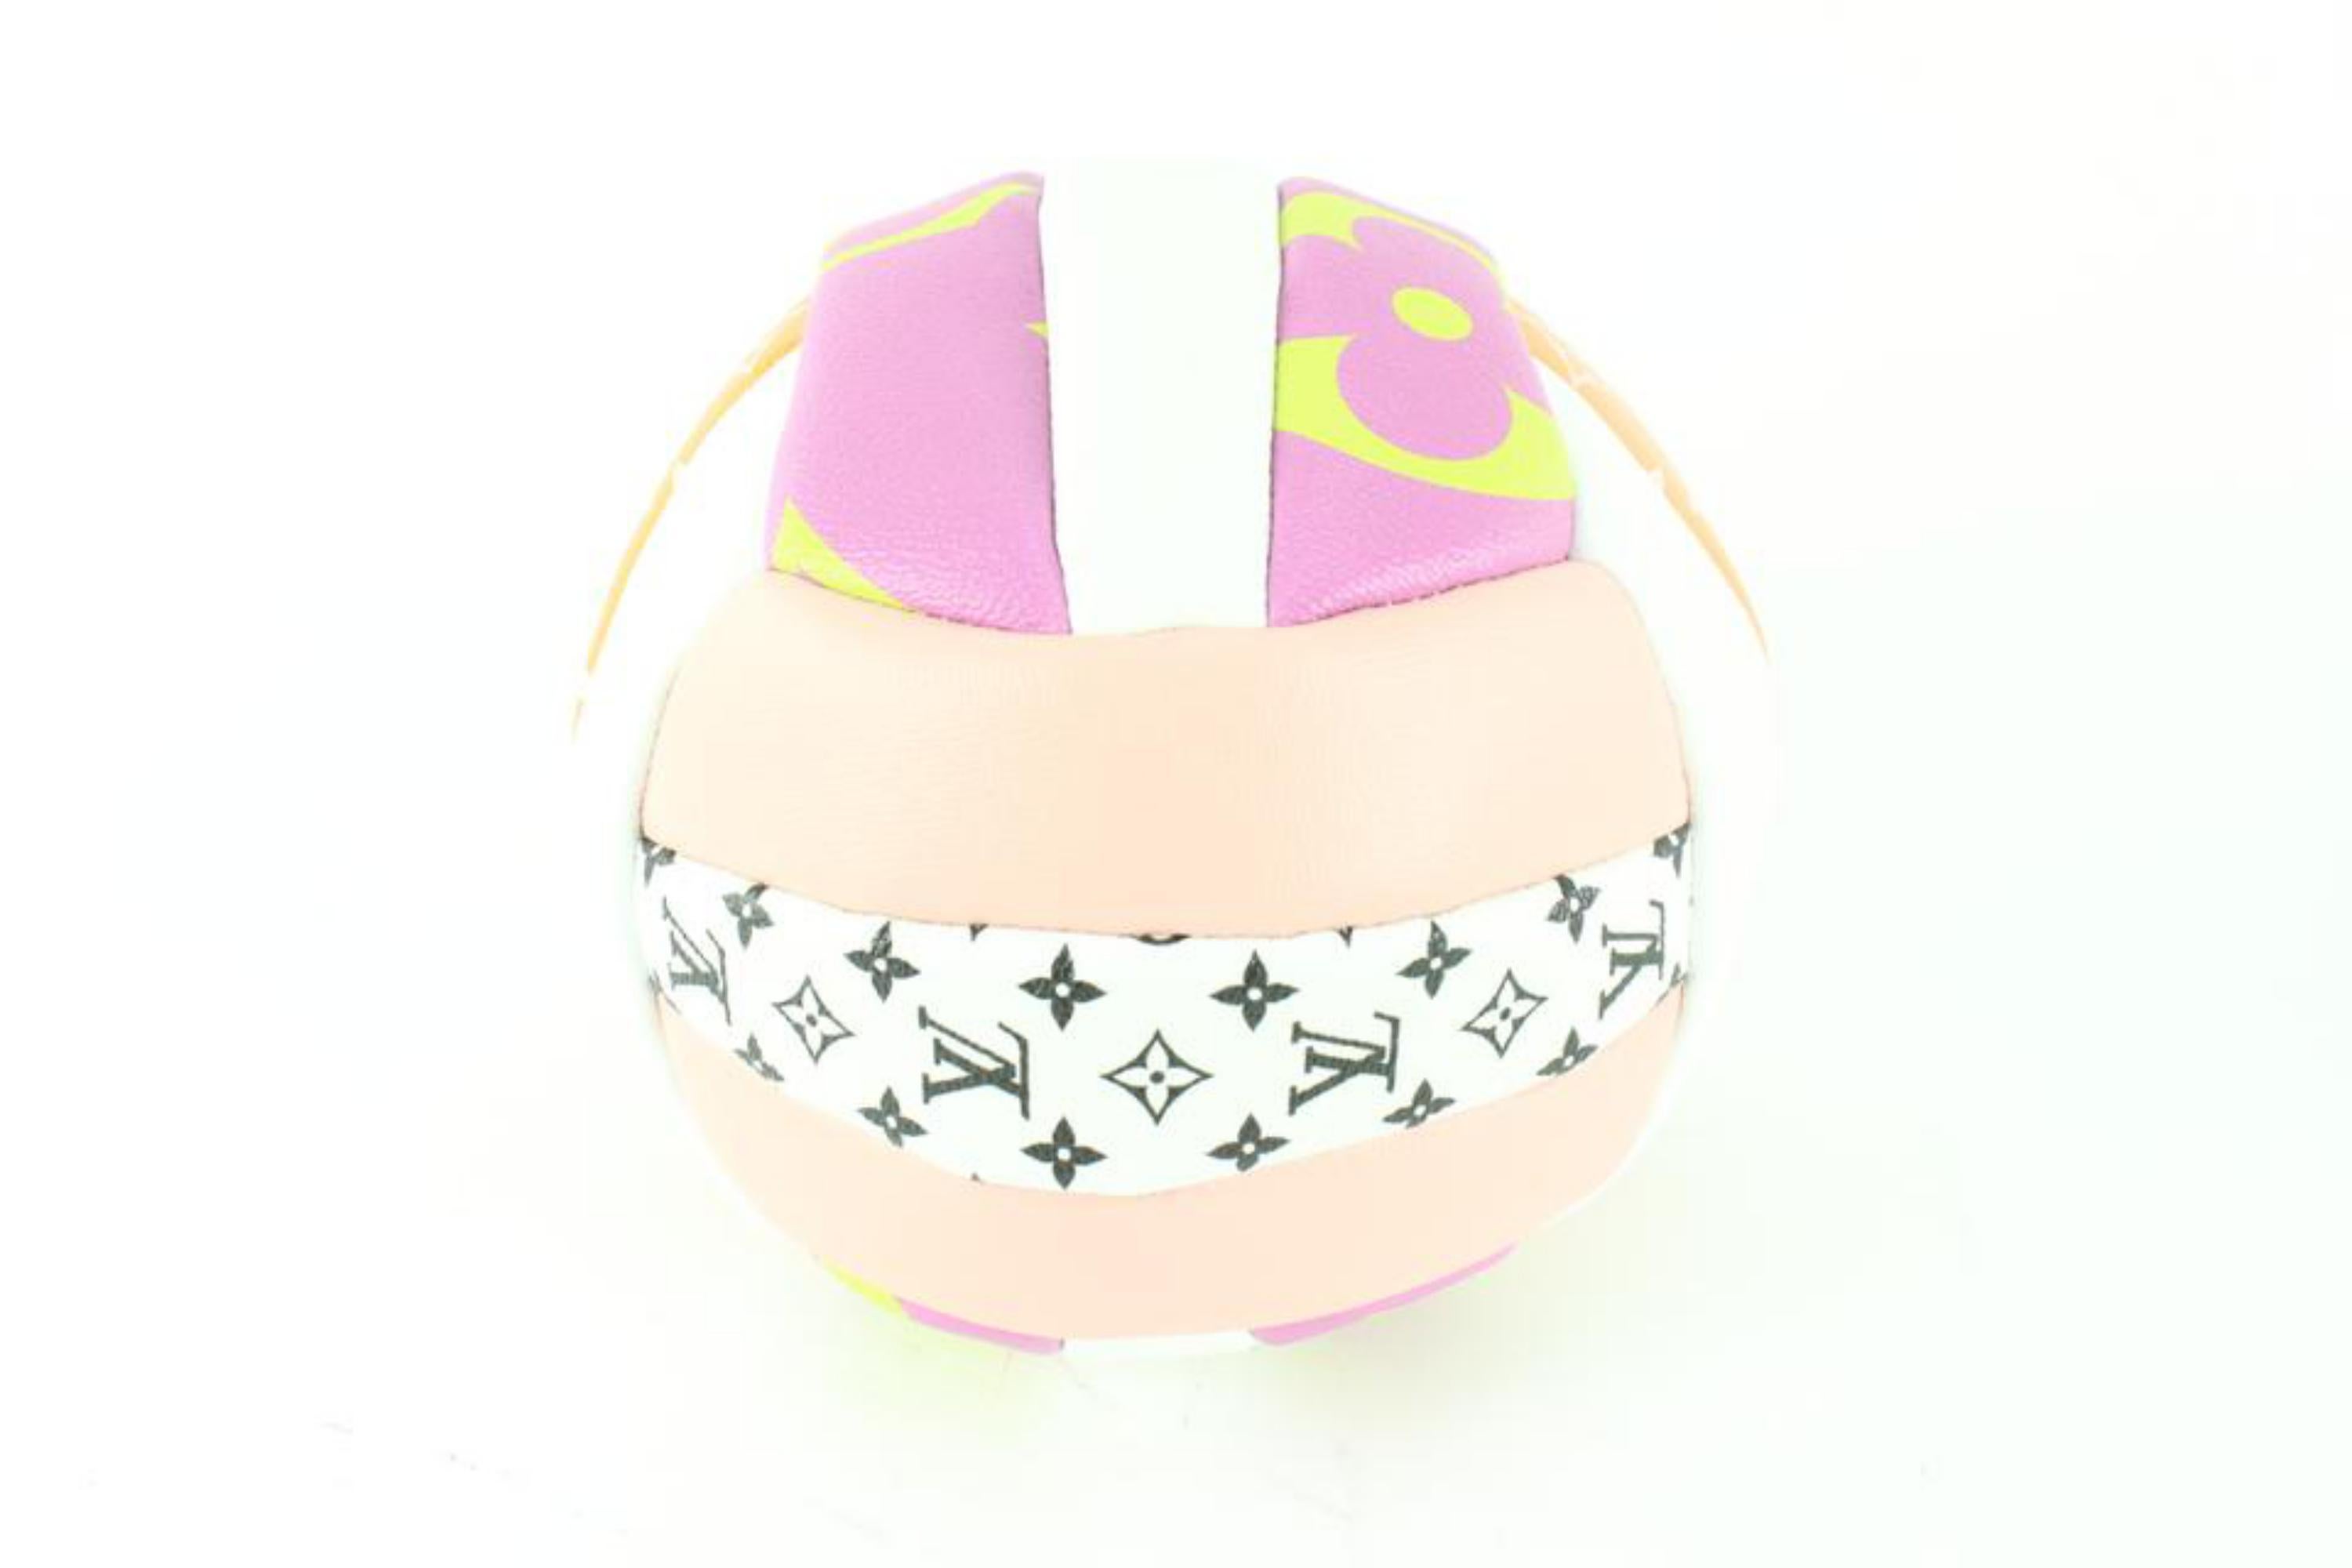 Louis Vuitton SS20 Limited Pink x Orange Monogram Giant Volleyball 39lk62s For Sale 5